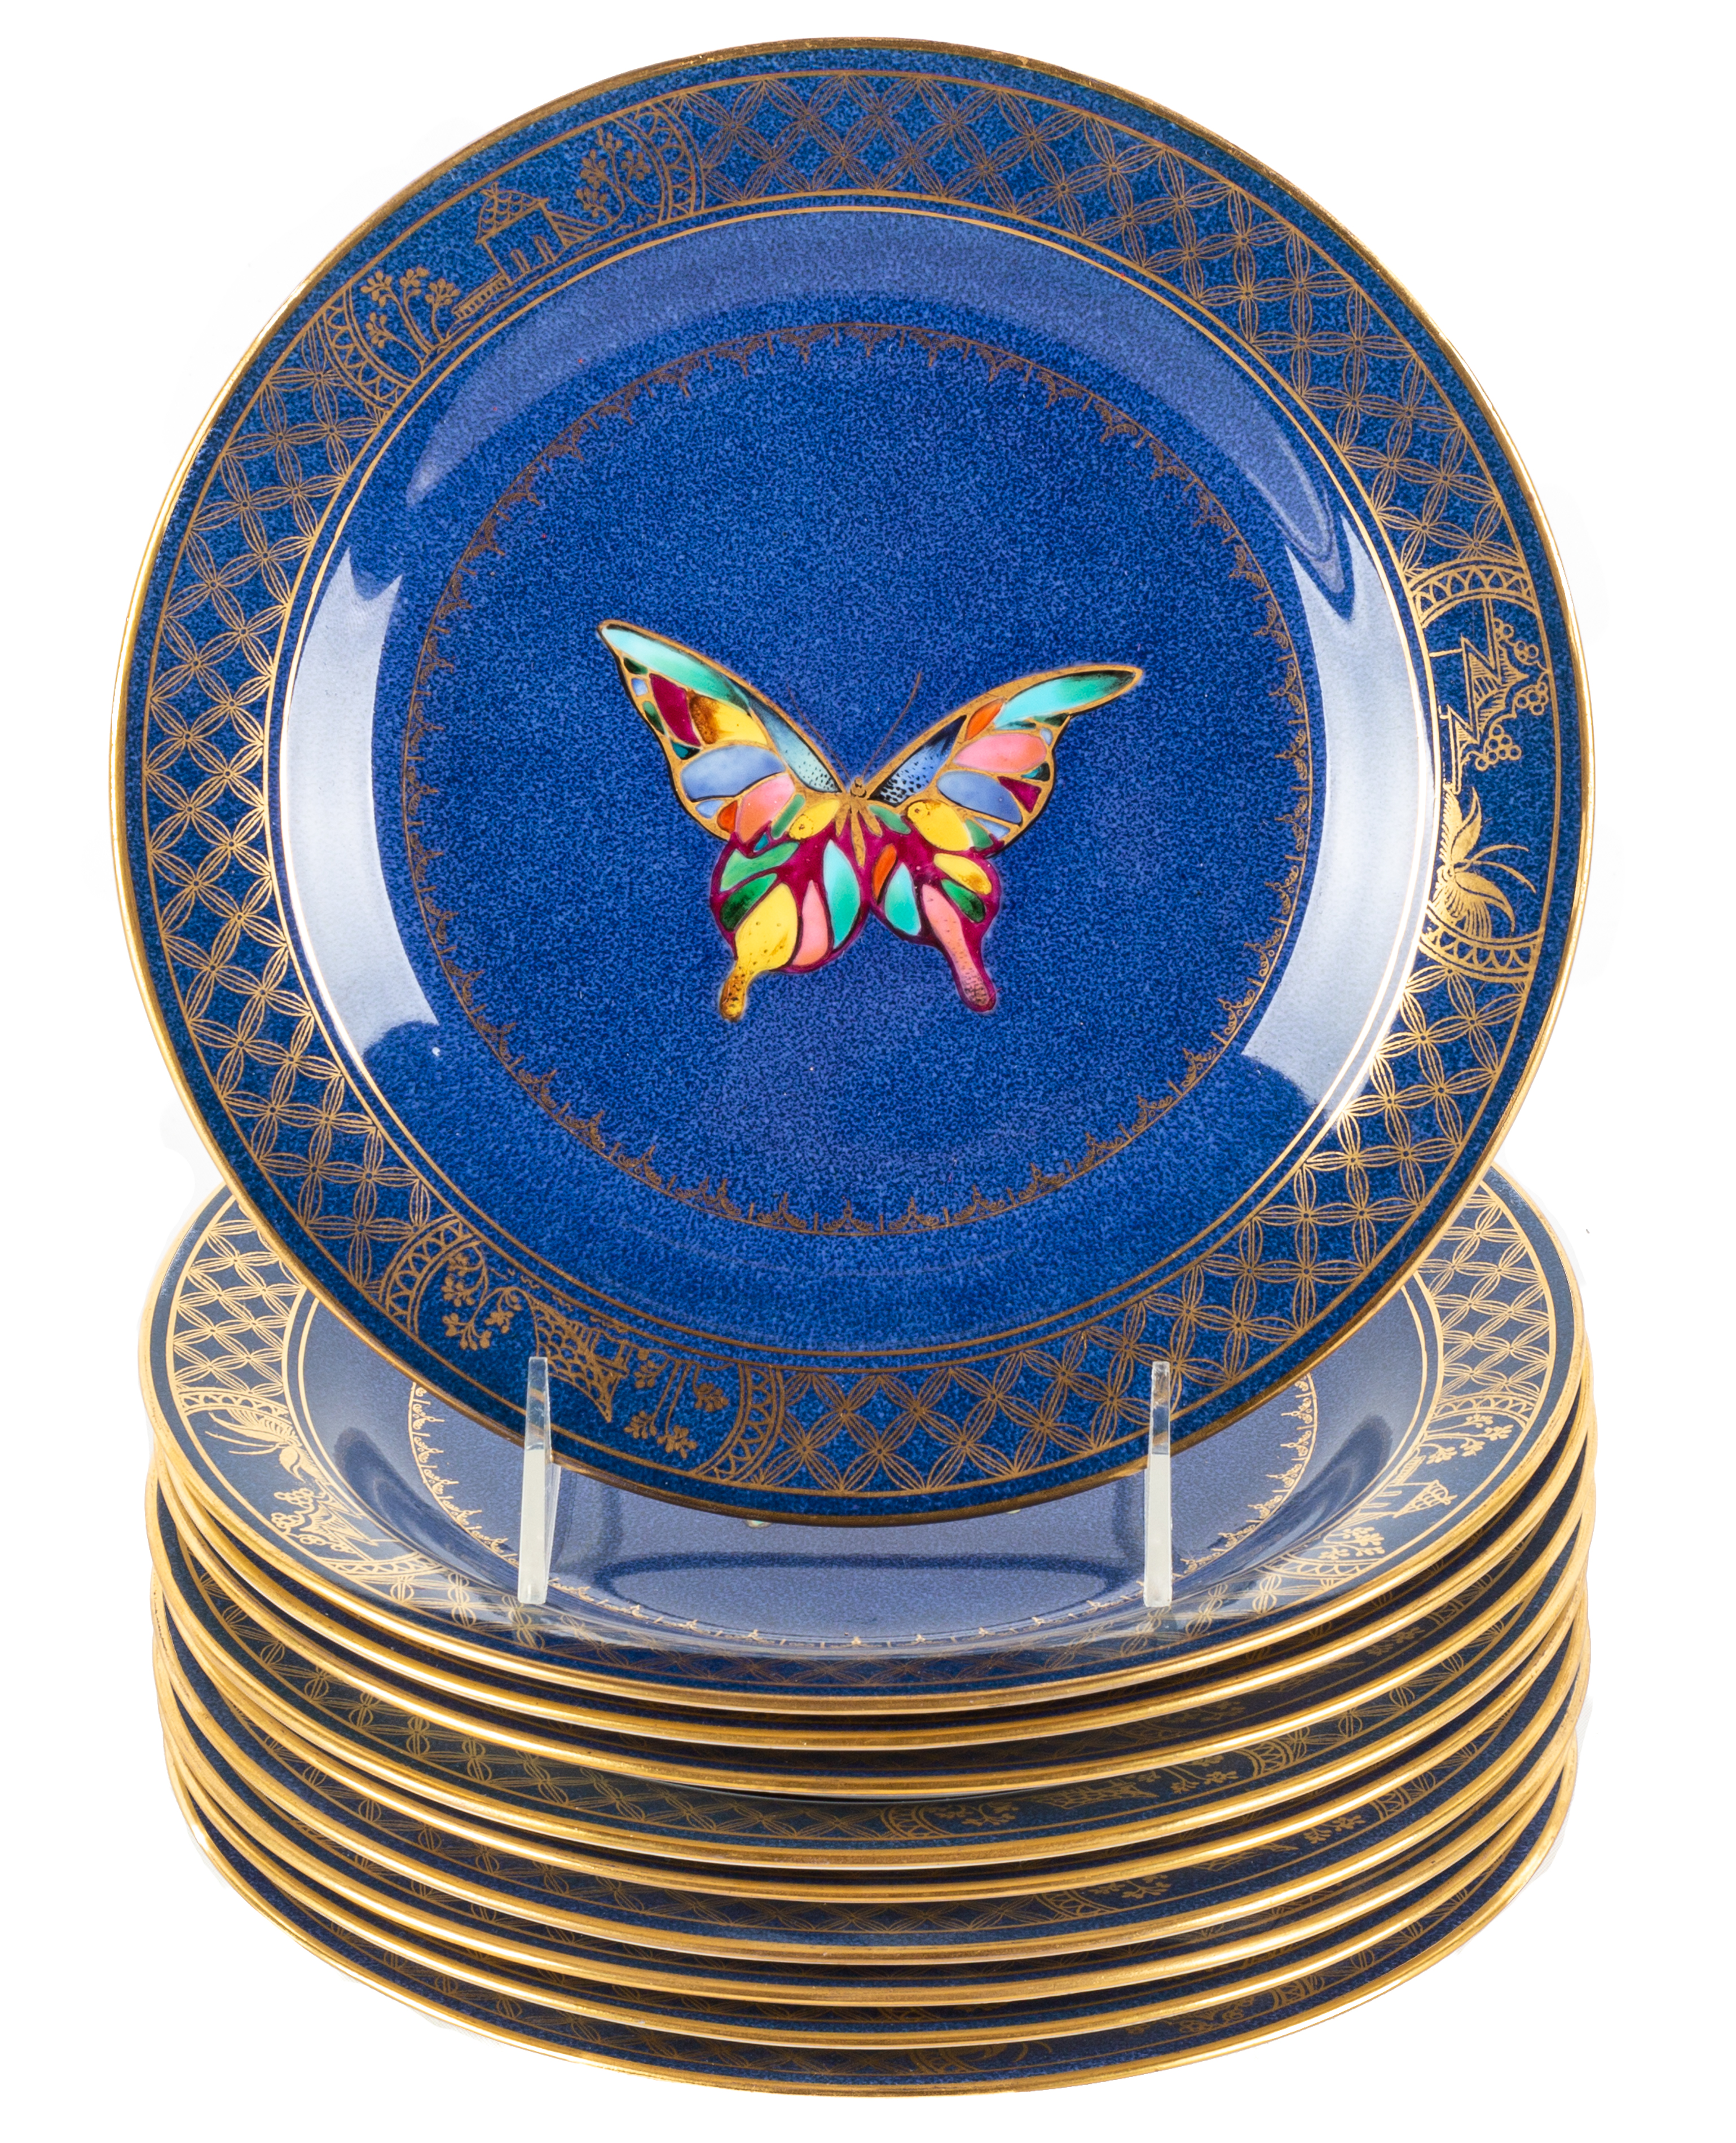  10 WEDGWOOD BUTTERFLY LUSTRE 28d322